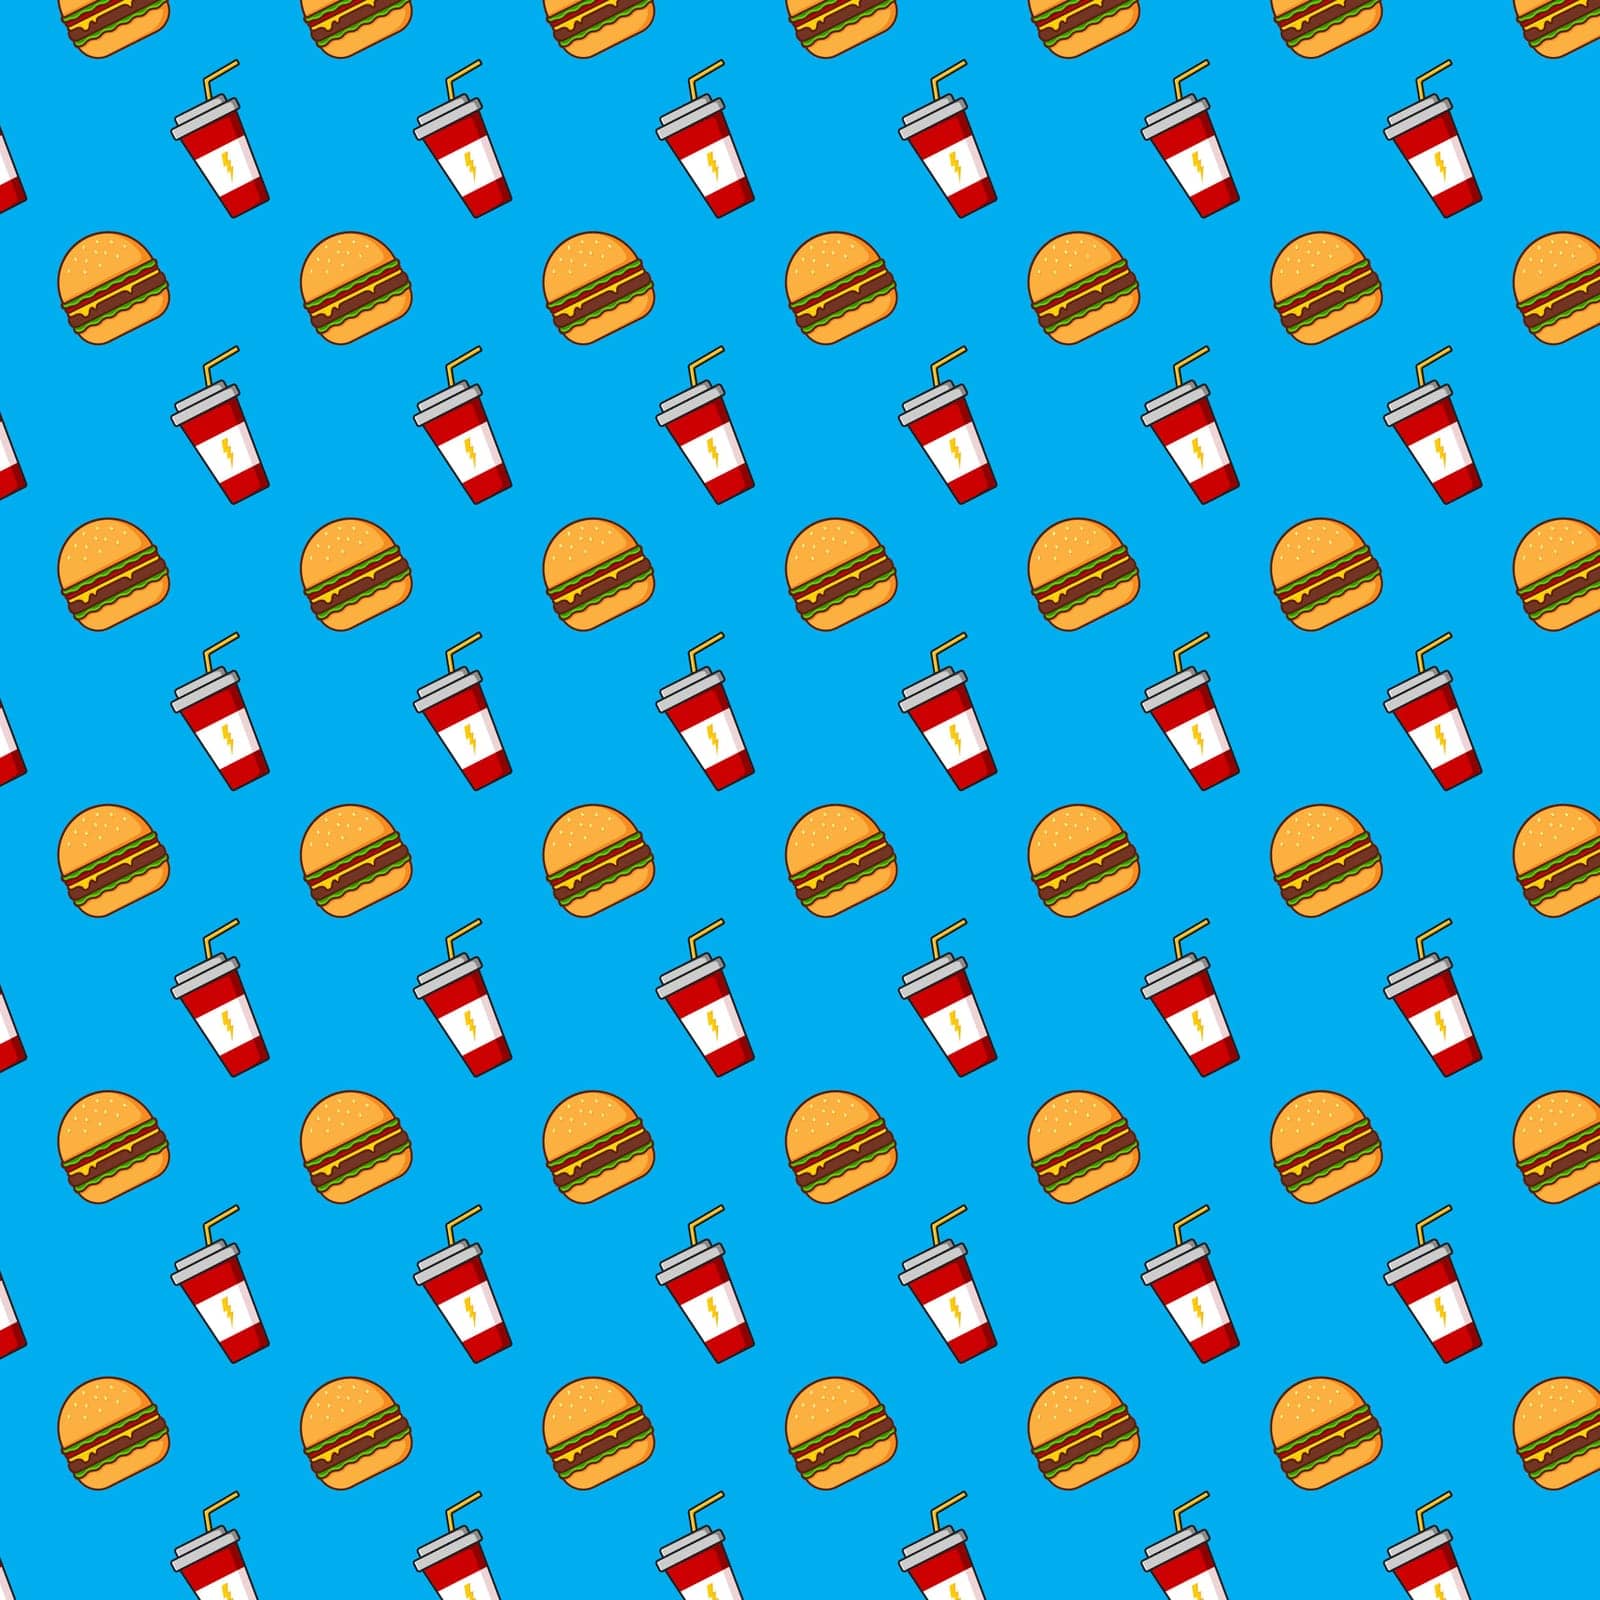 Cola and burger pattern, on a blue background. Vector image